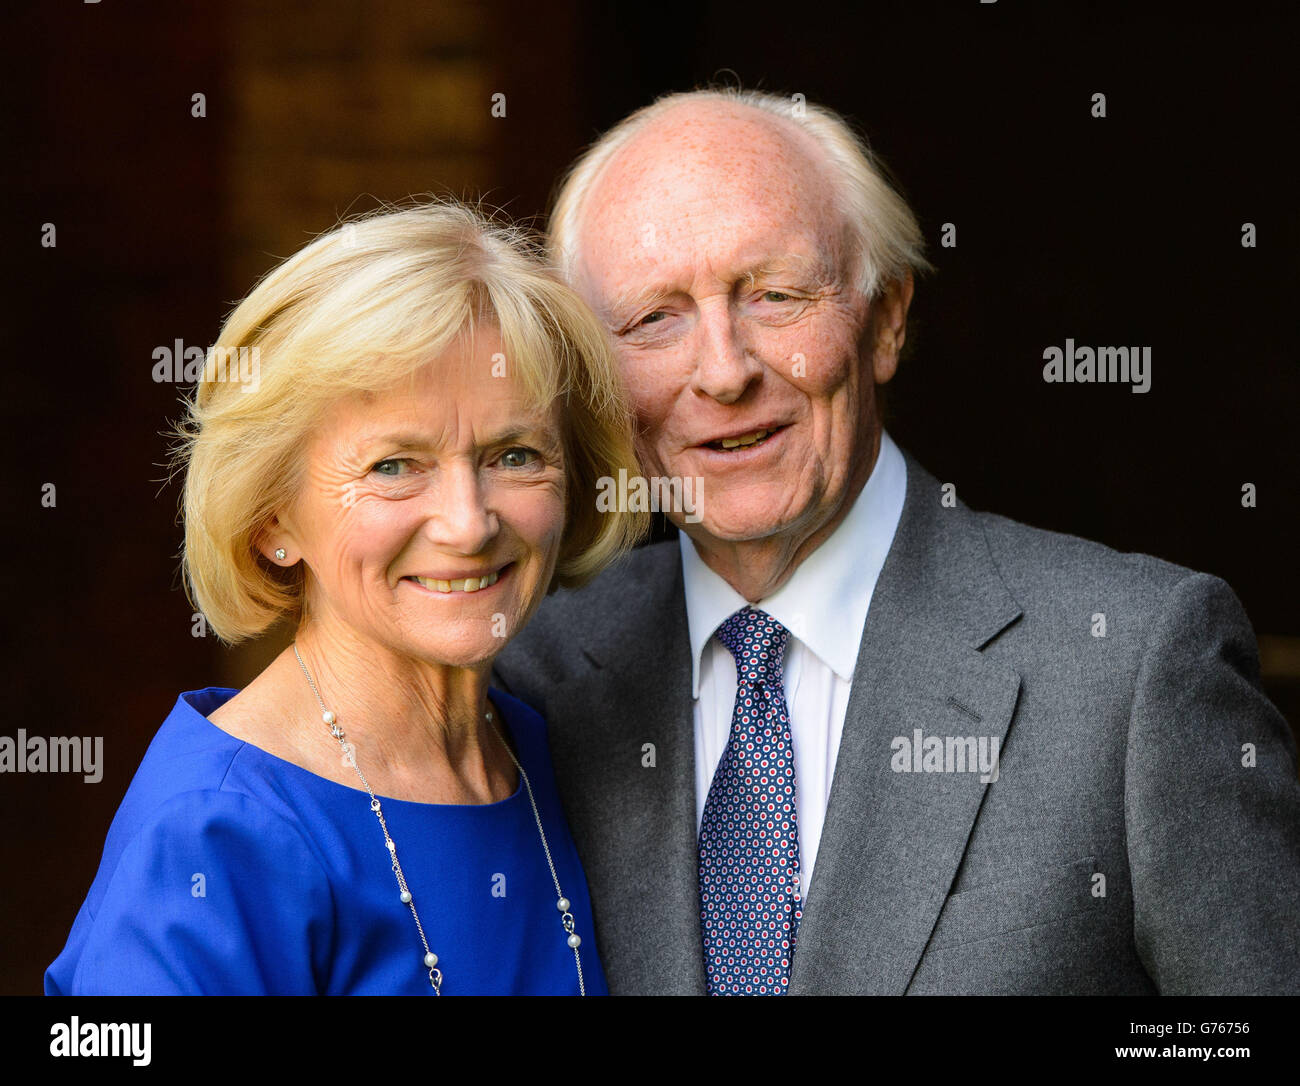 Lord Kinnock and his wife Glenys arriving at the Labour Summer Party at the Roundhouse, in Camden, north London. Stock Photo